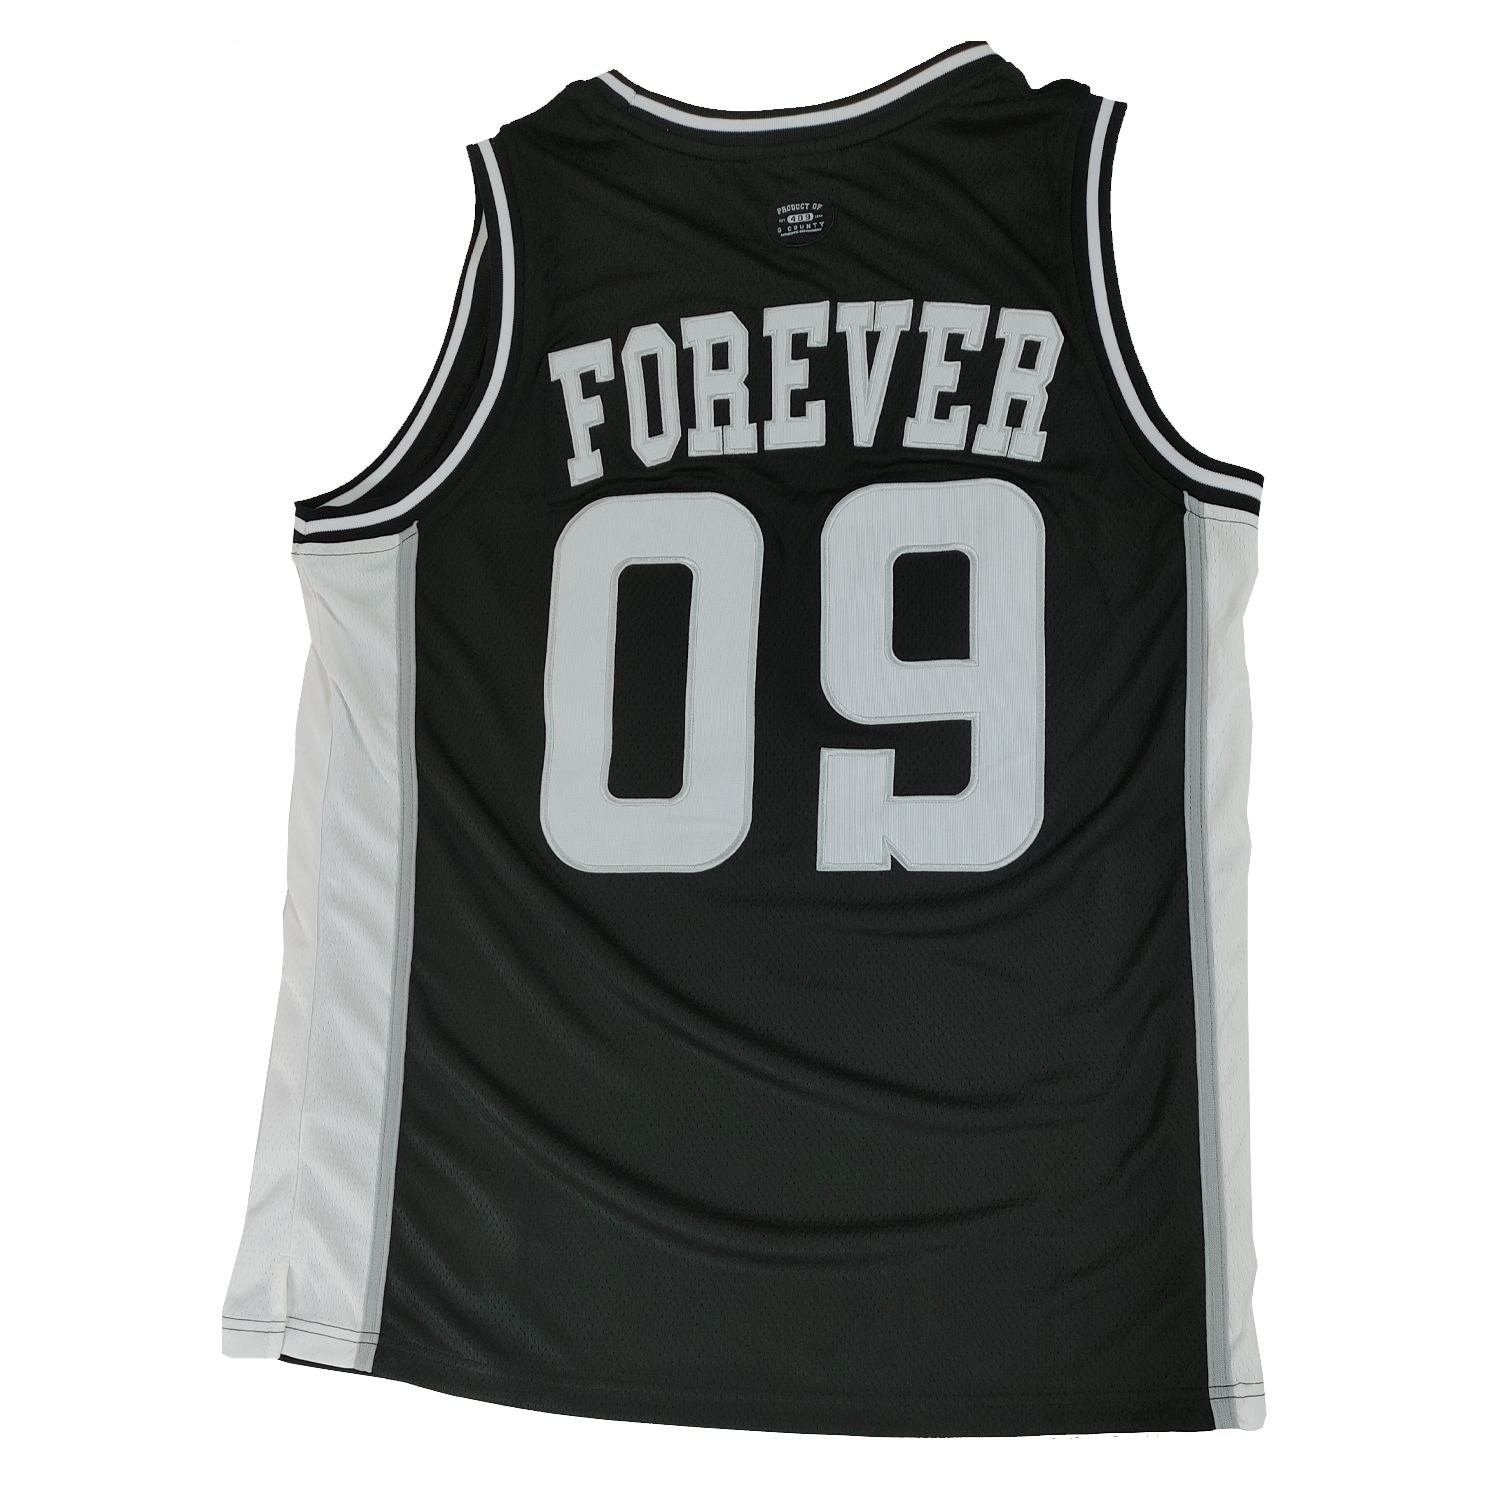 G COUNTY 409 FOREVER JERSEYS